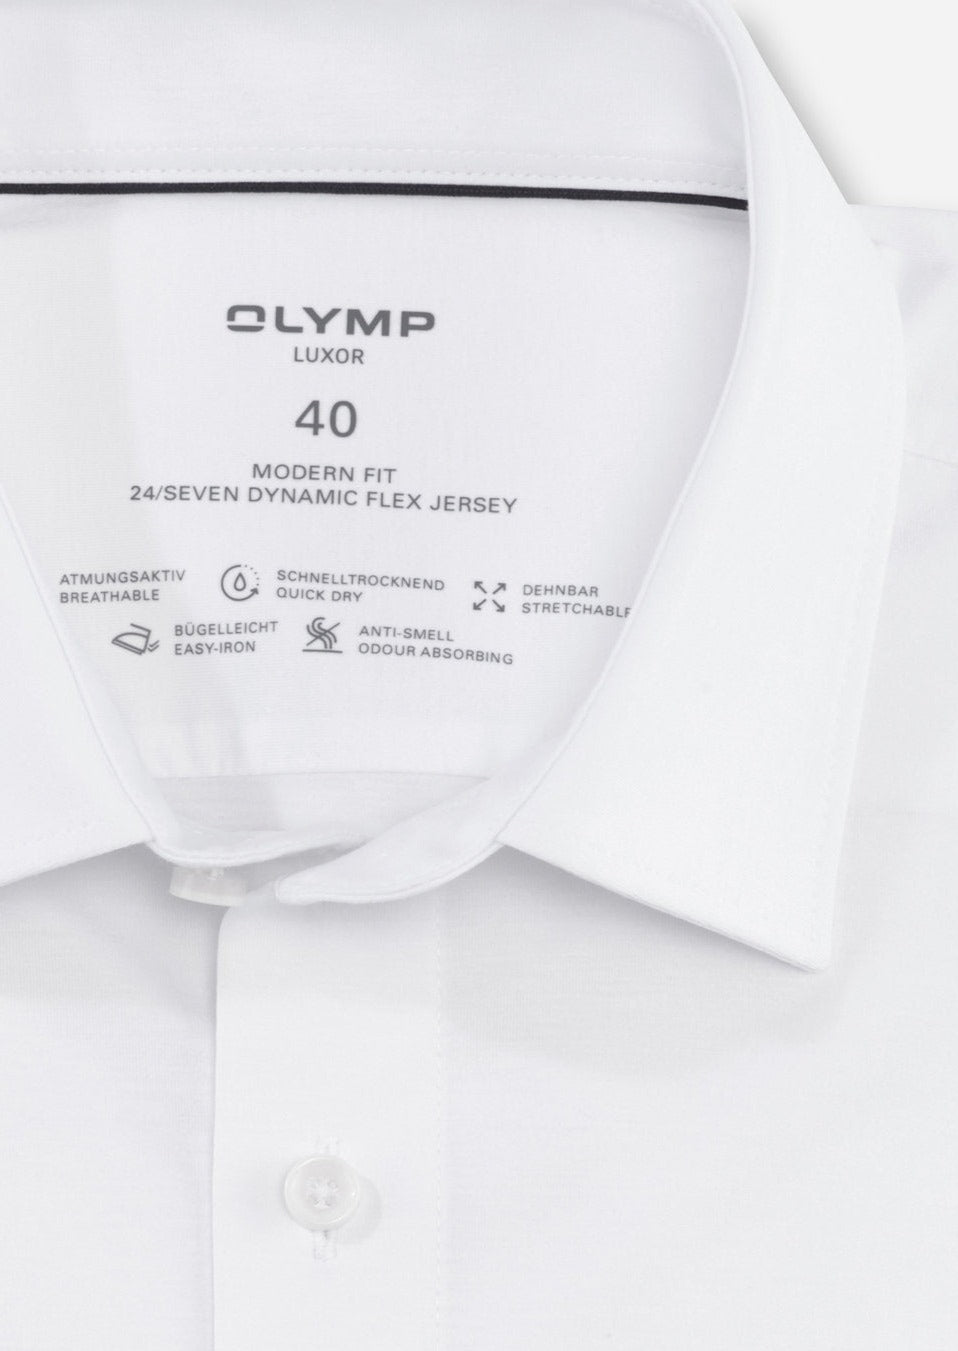 Chemise homme Luxor OLYMP droite blanche en coton stretch | Georgespaul